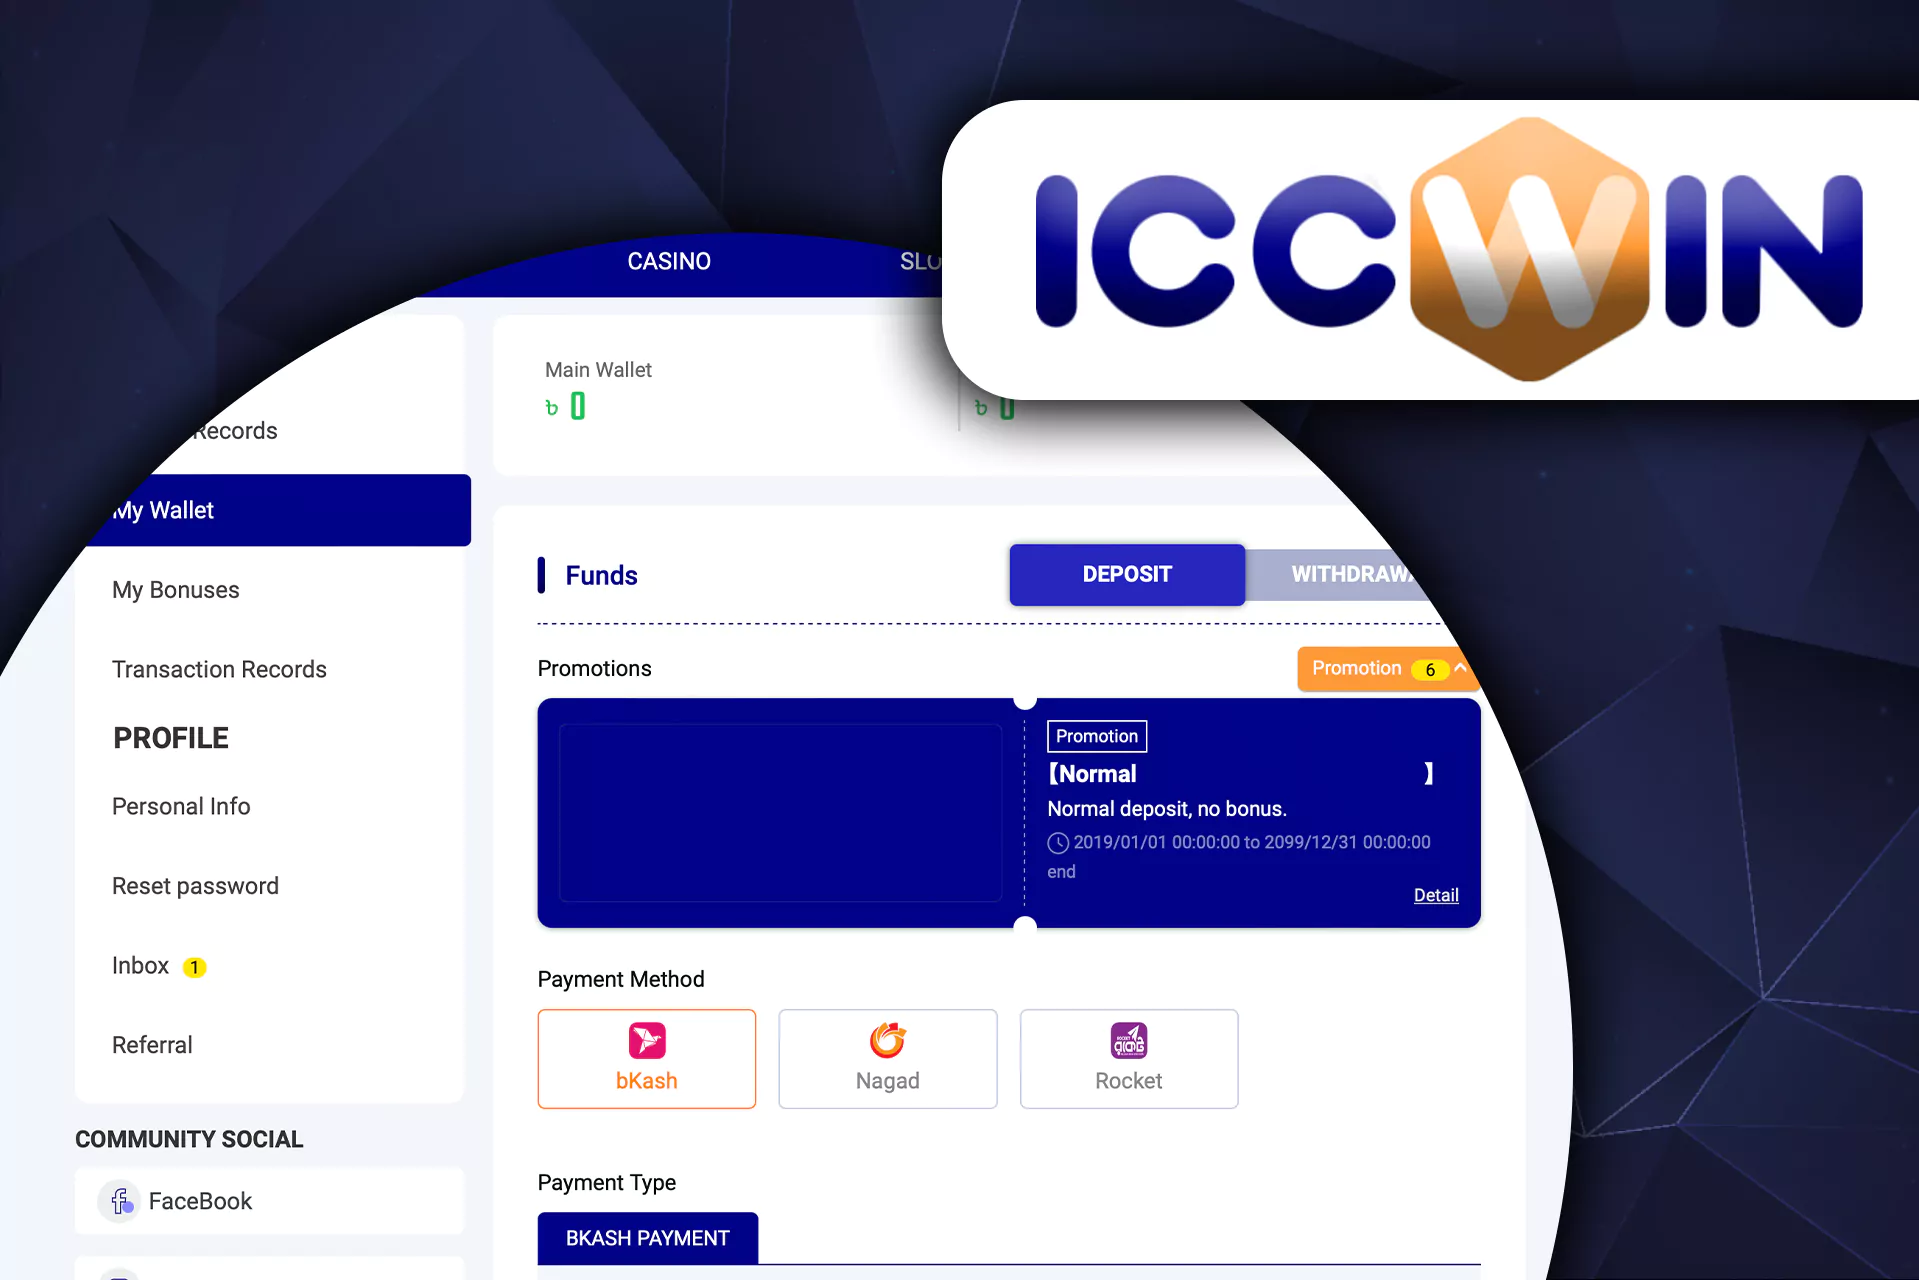 You can easily and fastly deposit and withdraw money from ICCWIN.